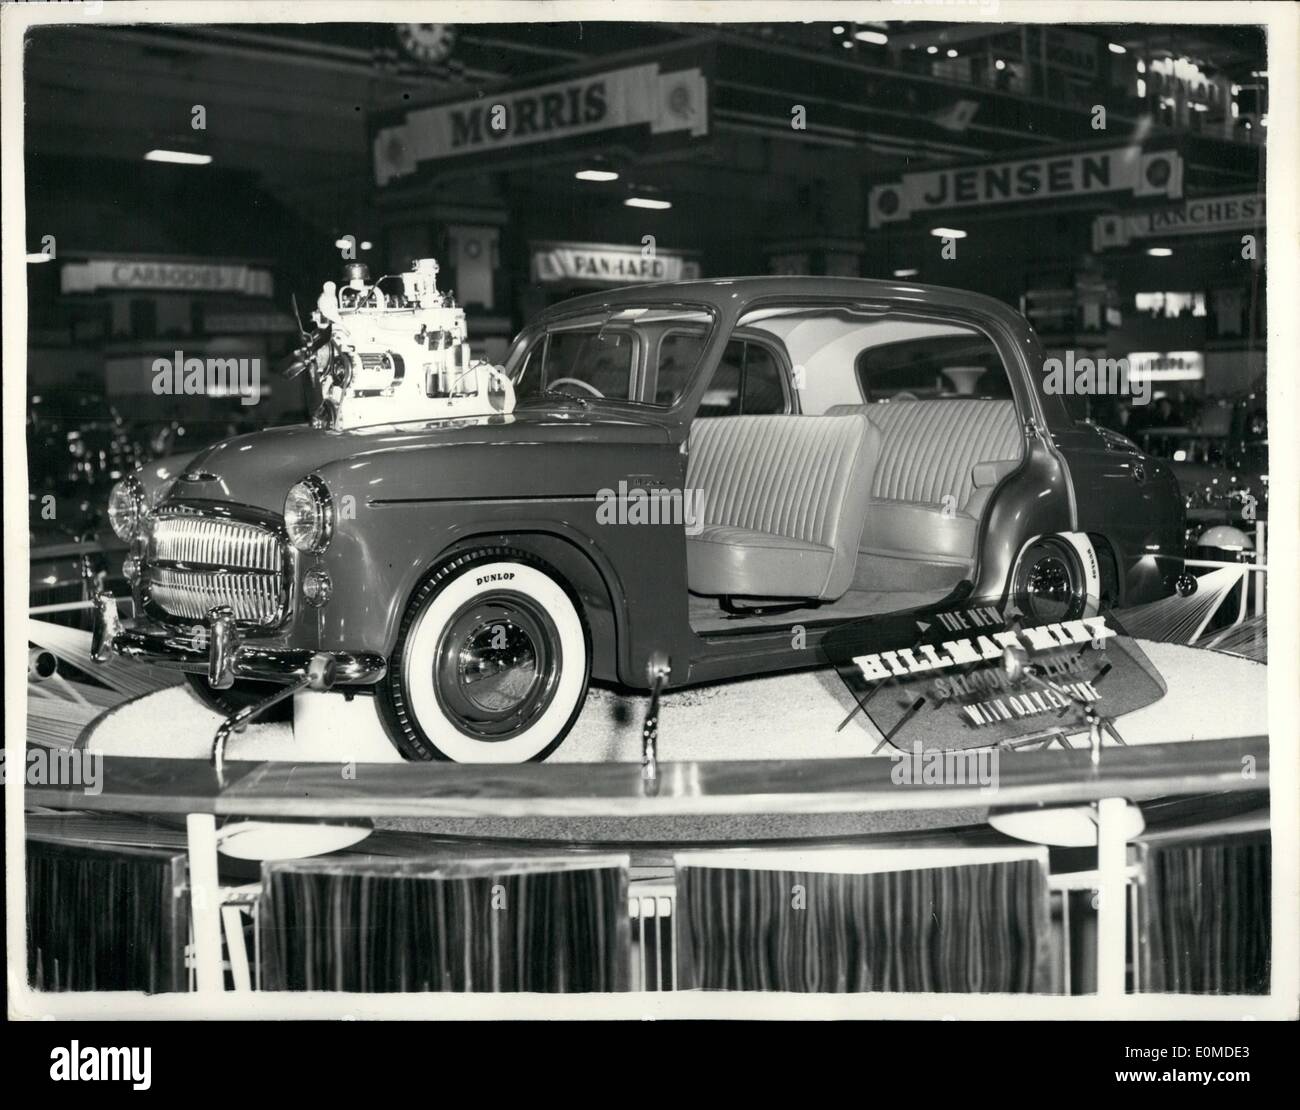 Oct. 10, 1954 - Preview Of The International Motor Show.. With The Engine On Top.. Minx Display Model. Photo Shows: View of the Stock Photo